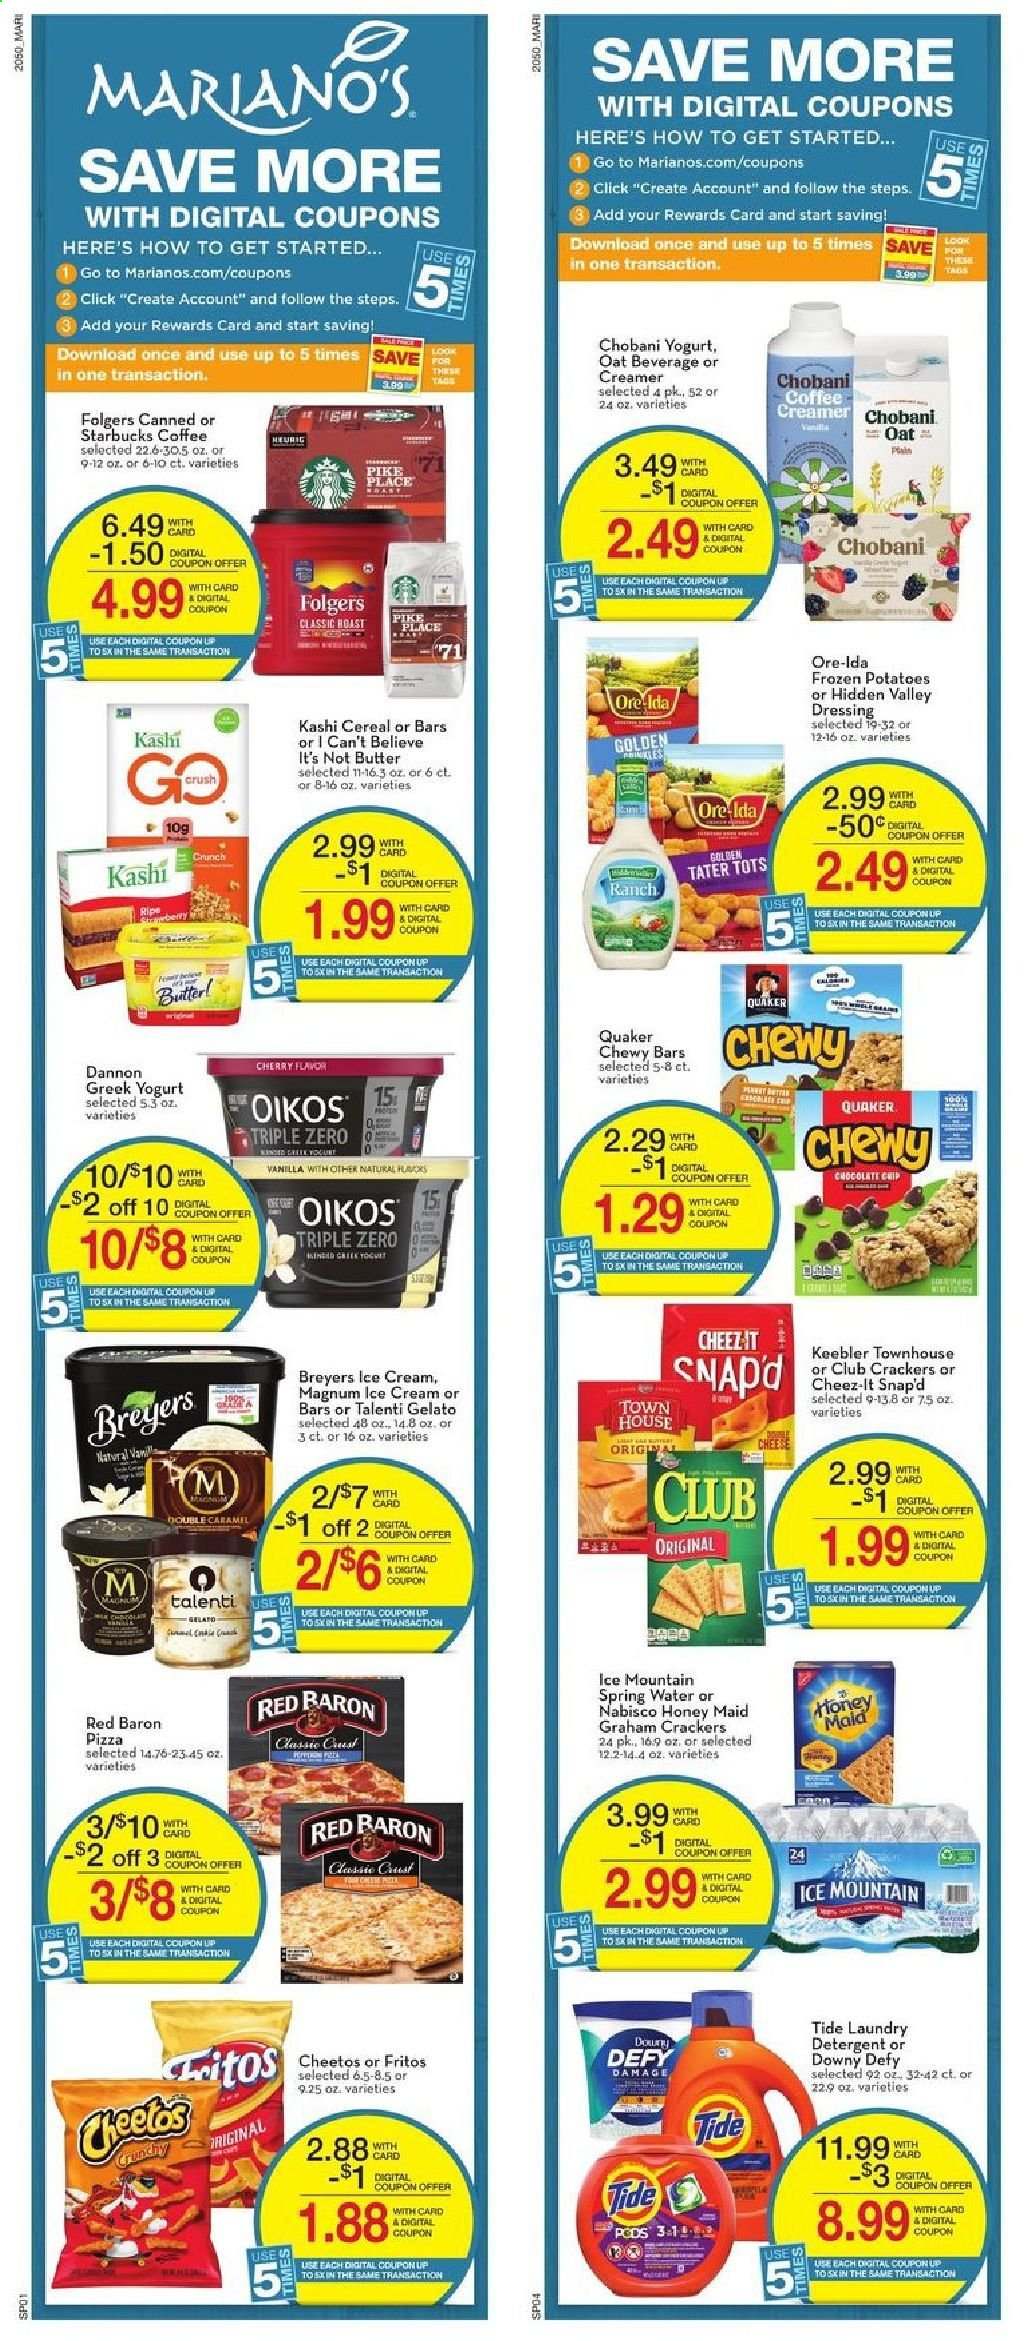 thumbnail - Mariano’s Flyer - 01/13/2021 - 01/19/2021 - Sales products - pizza, Quaker, greek yoghurt, yoghurt, Oikos, Chobani, Dannon, butter, I Can't Believe It's Not Butter, creamer, Magnum, ice cream, Talenti Gelato, gelato, Ore-Ida, Red Baron, graham crackers, crackers, Keebler, Cheetos, Cheez-It, oats, cereals, Fritos, Honey Maid, caramel, dressing, spring water, Ice Mountain, coffee, Folgers, detergent, Tide, laundry detergent. Page 2.